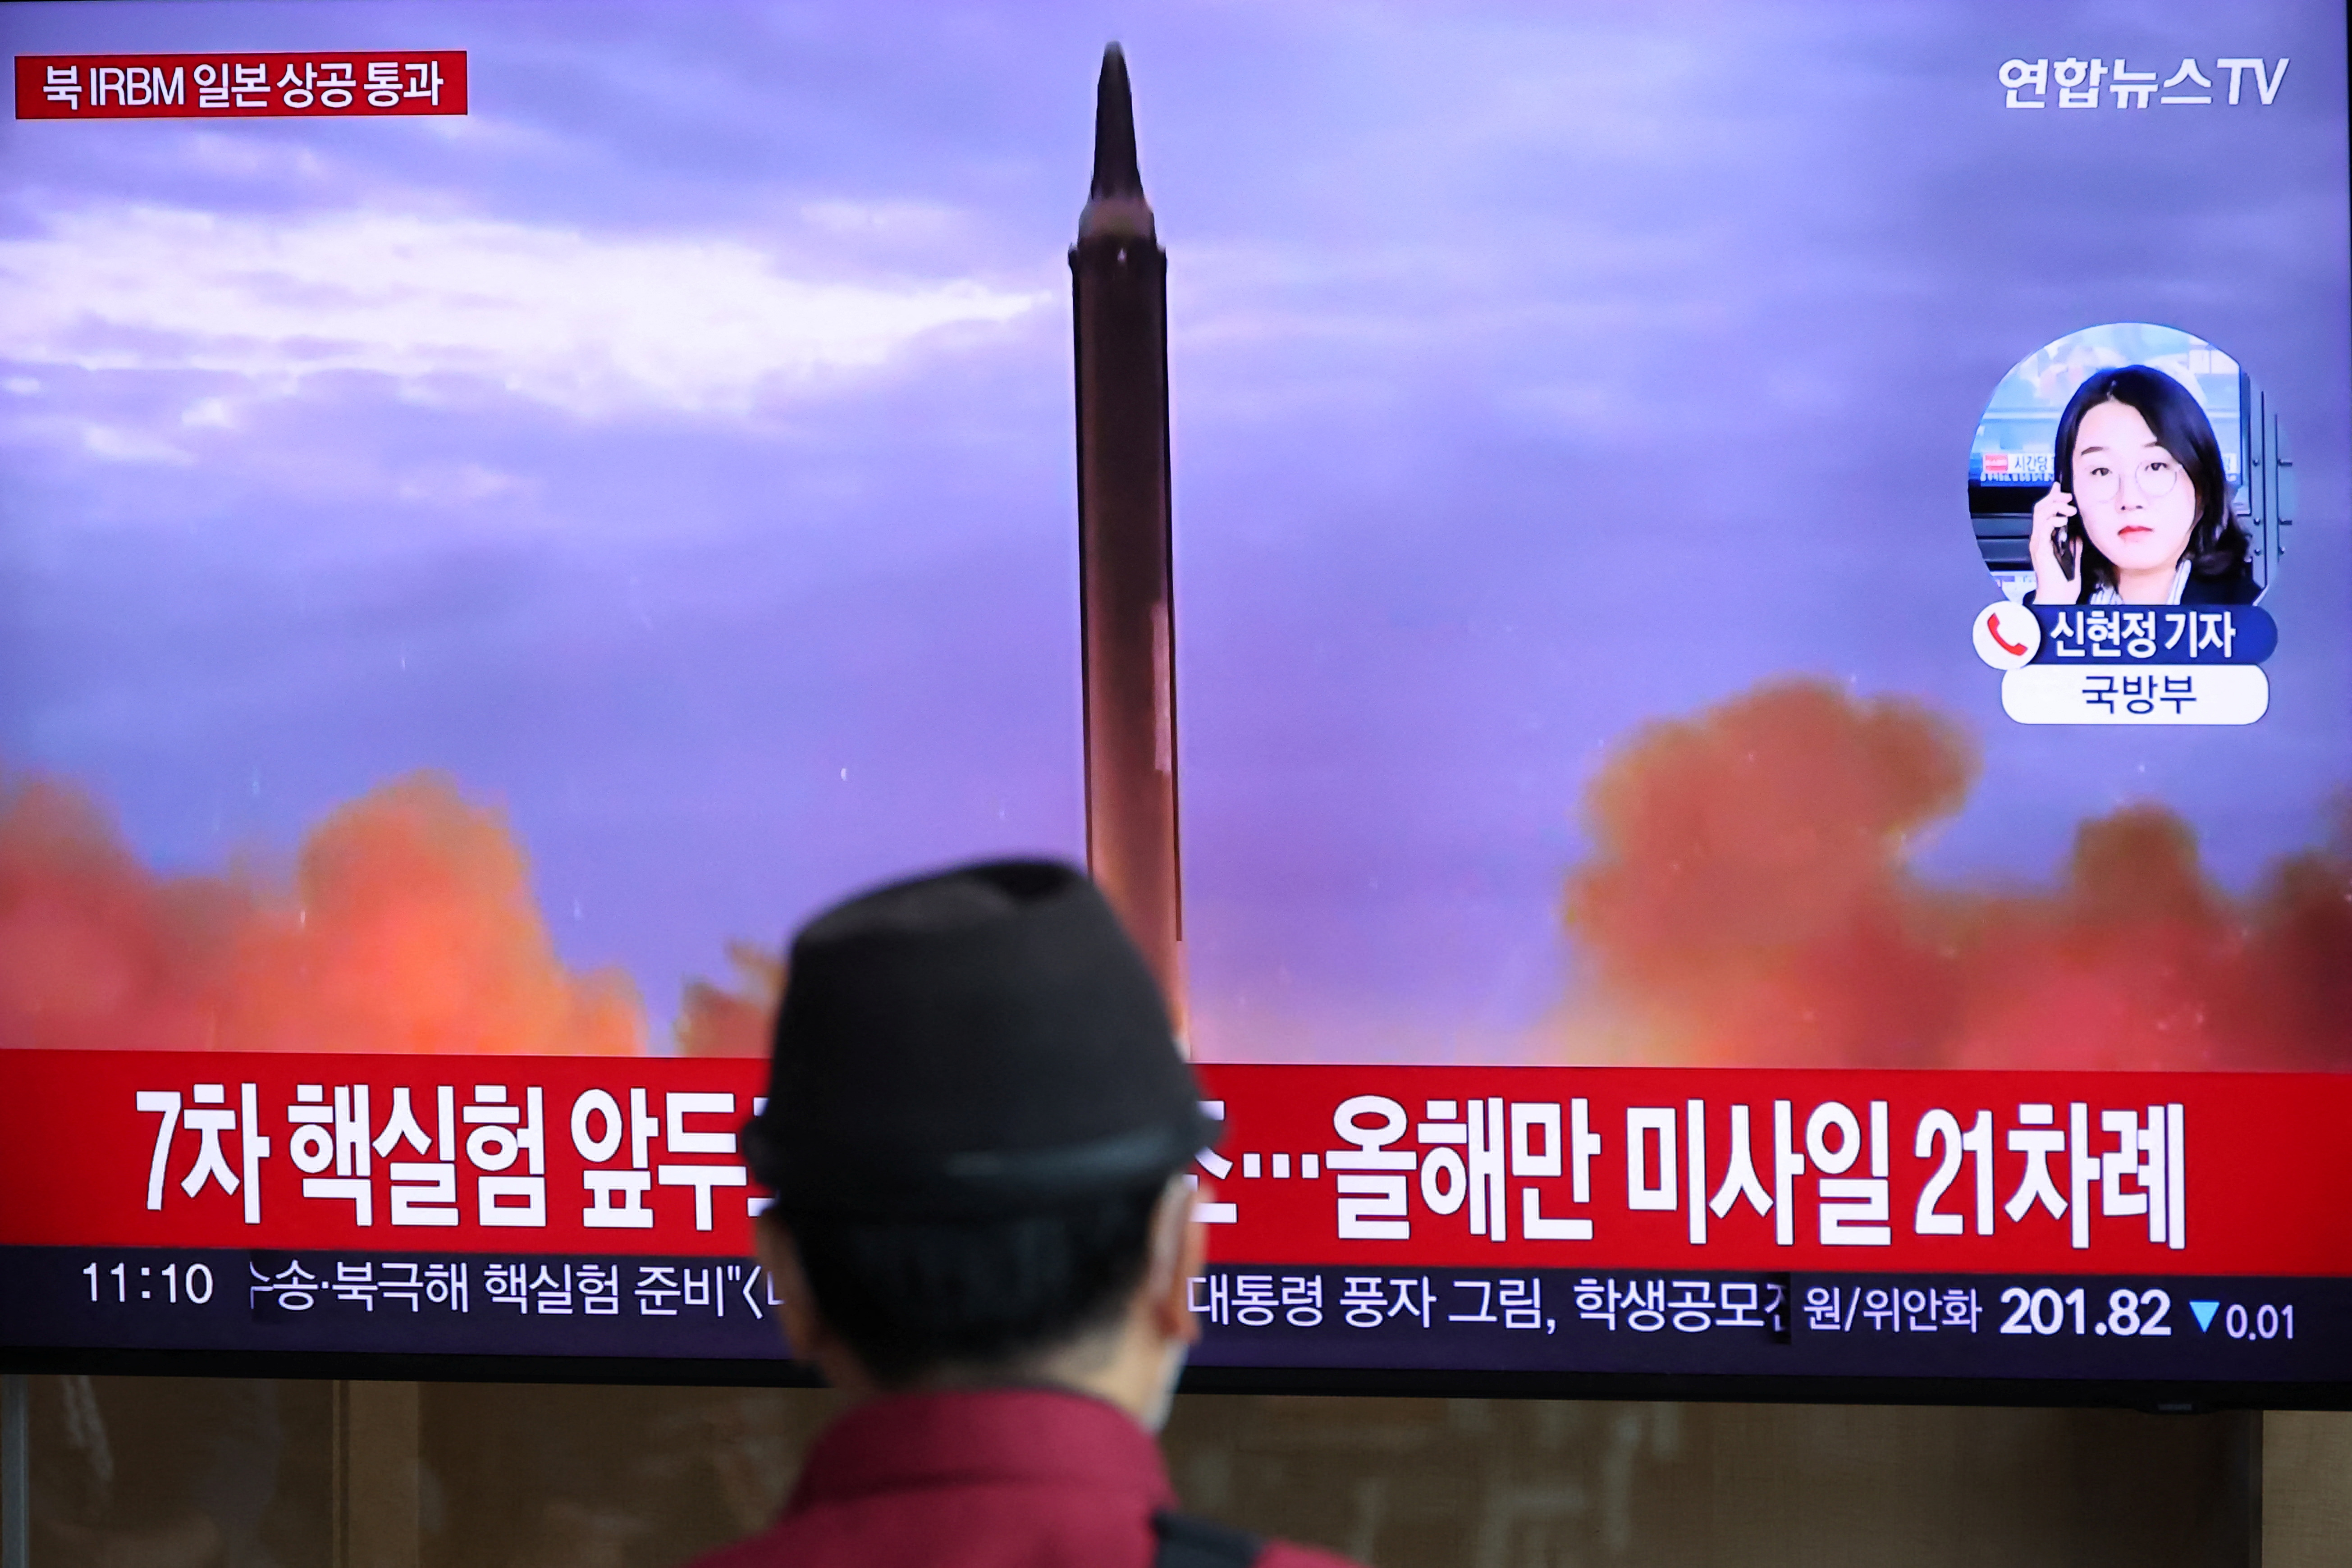 A man watches a TV broadcast in South Korea about North Korea's latest launch (Reuters)